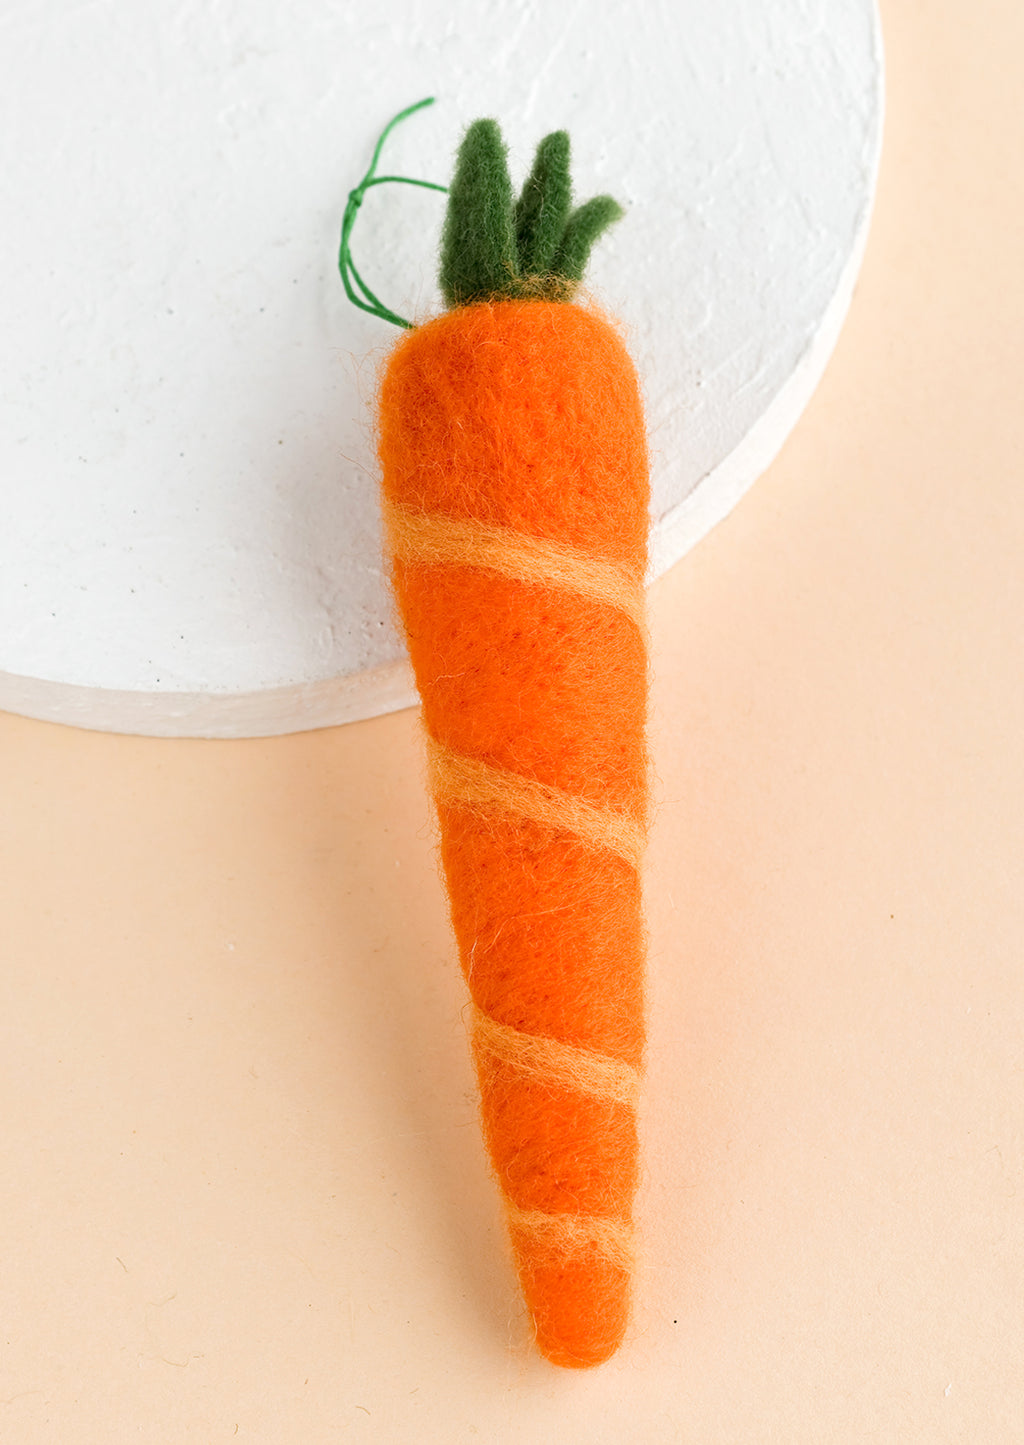 Carrot: A felted ornament of a carrot.